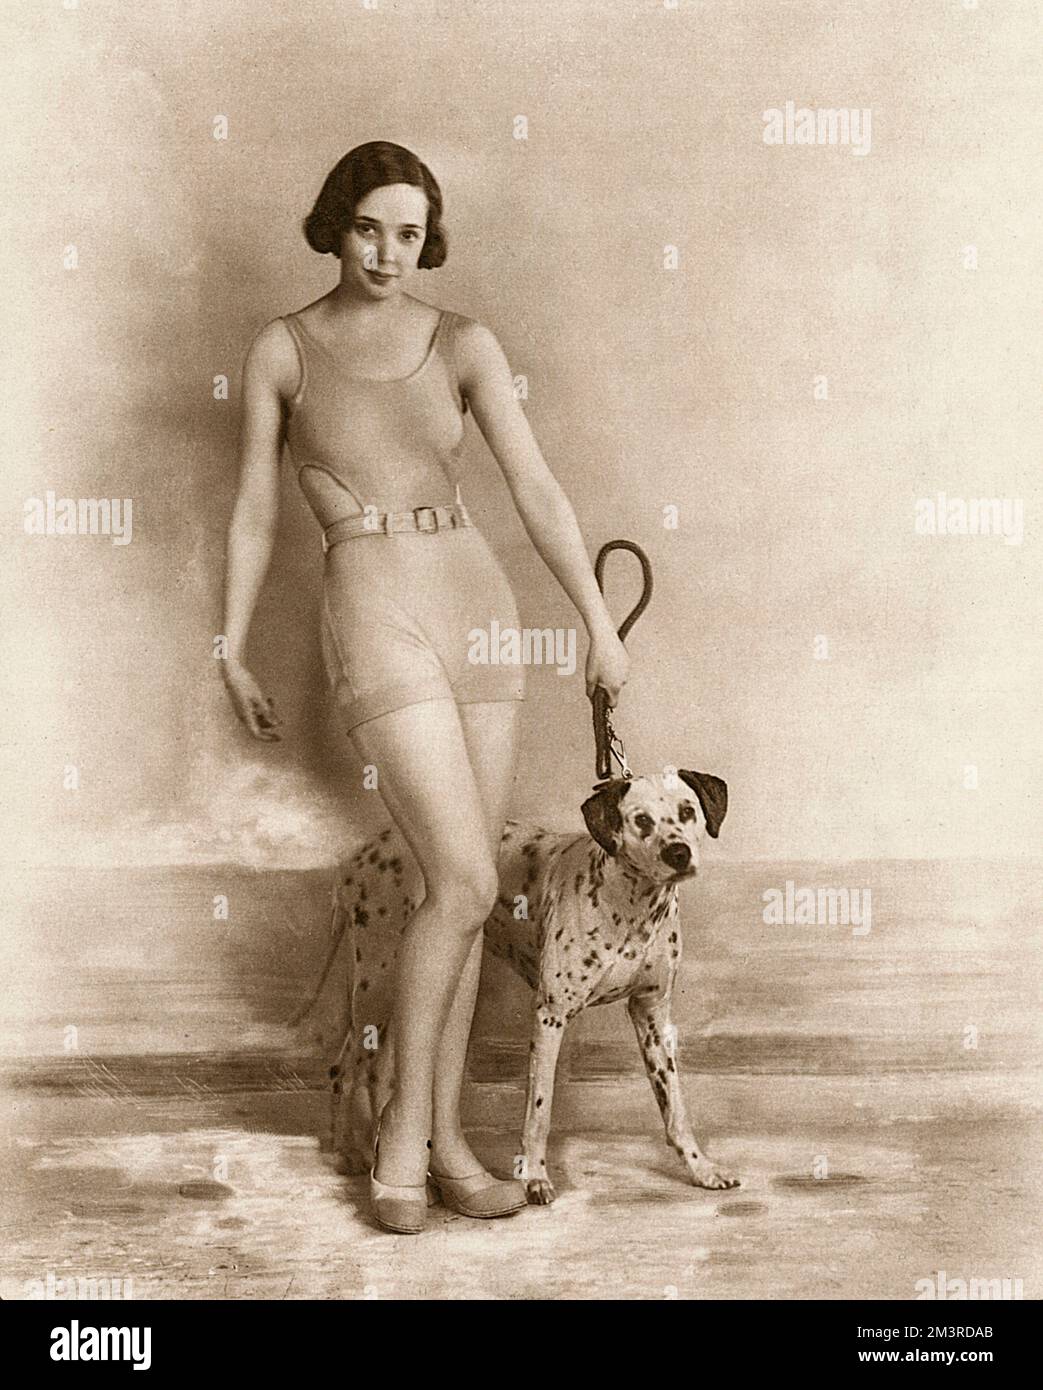 Jessie Matthews (1907-1981), British actress, singer and dancer, pictured at the time she was appearing in Ever Green at the Adelphi Theatre in London.  Dressed in a swimsuit, she is accompanied by a dalmatian dog.     Date: 1931 Stock Photo